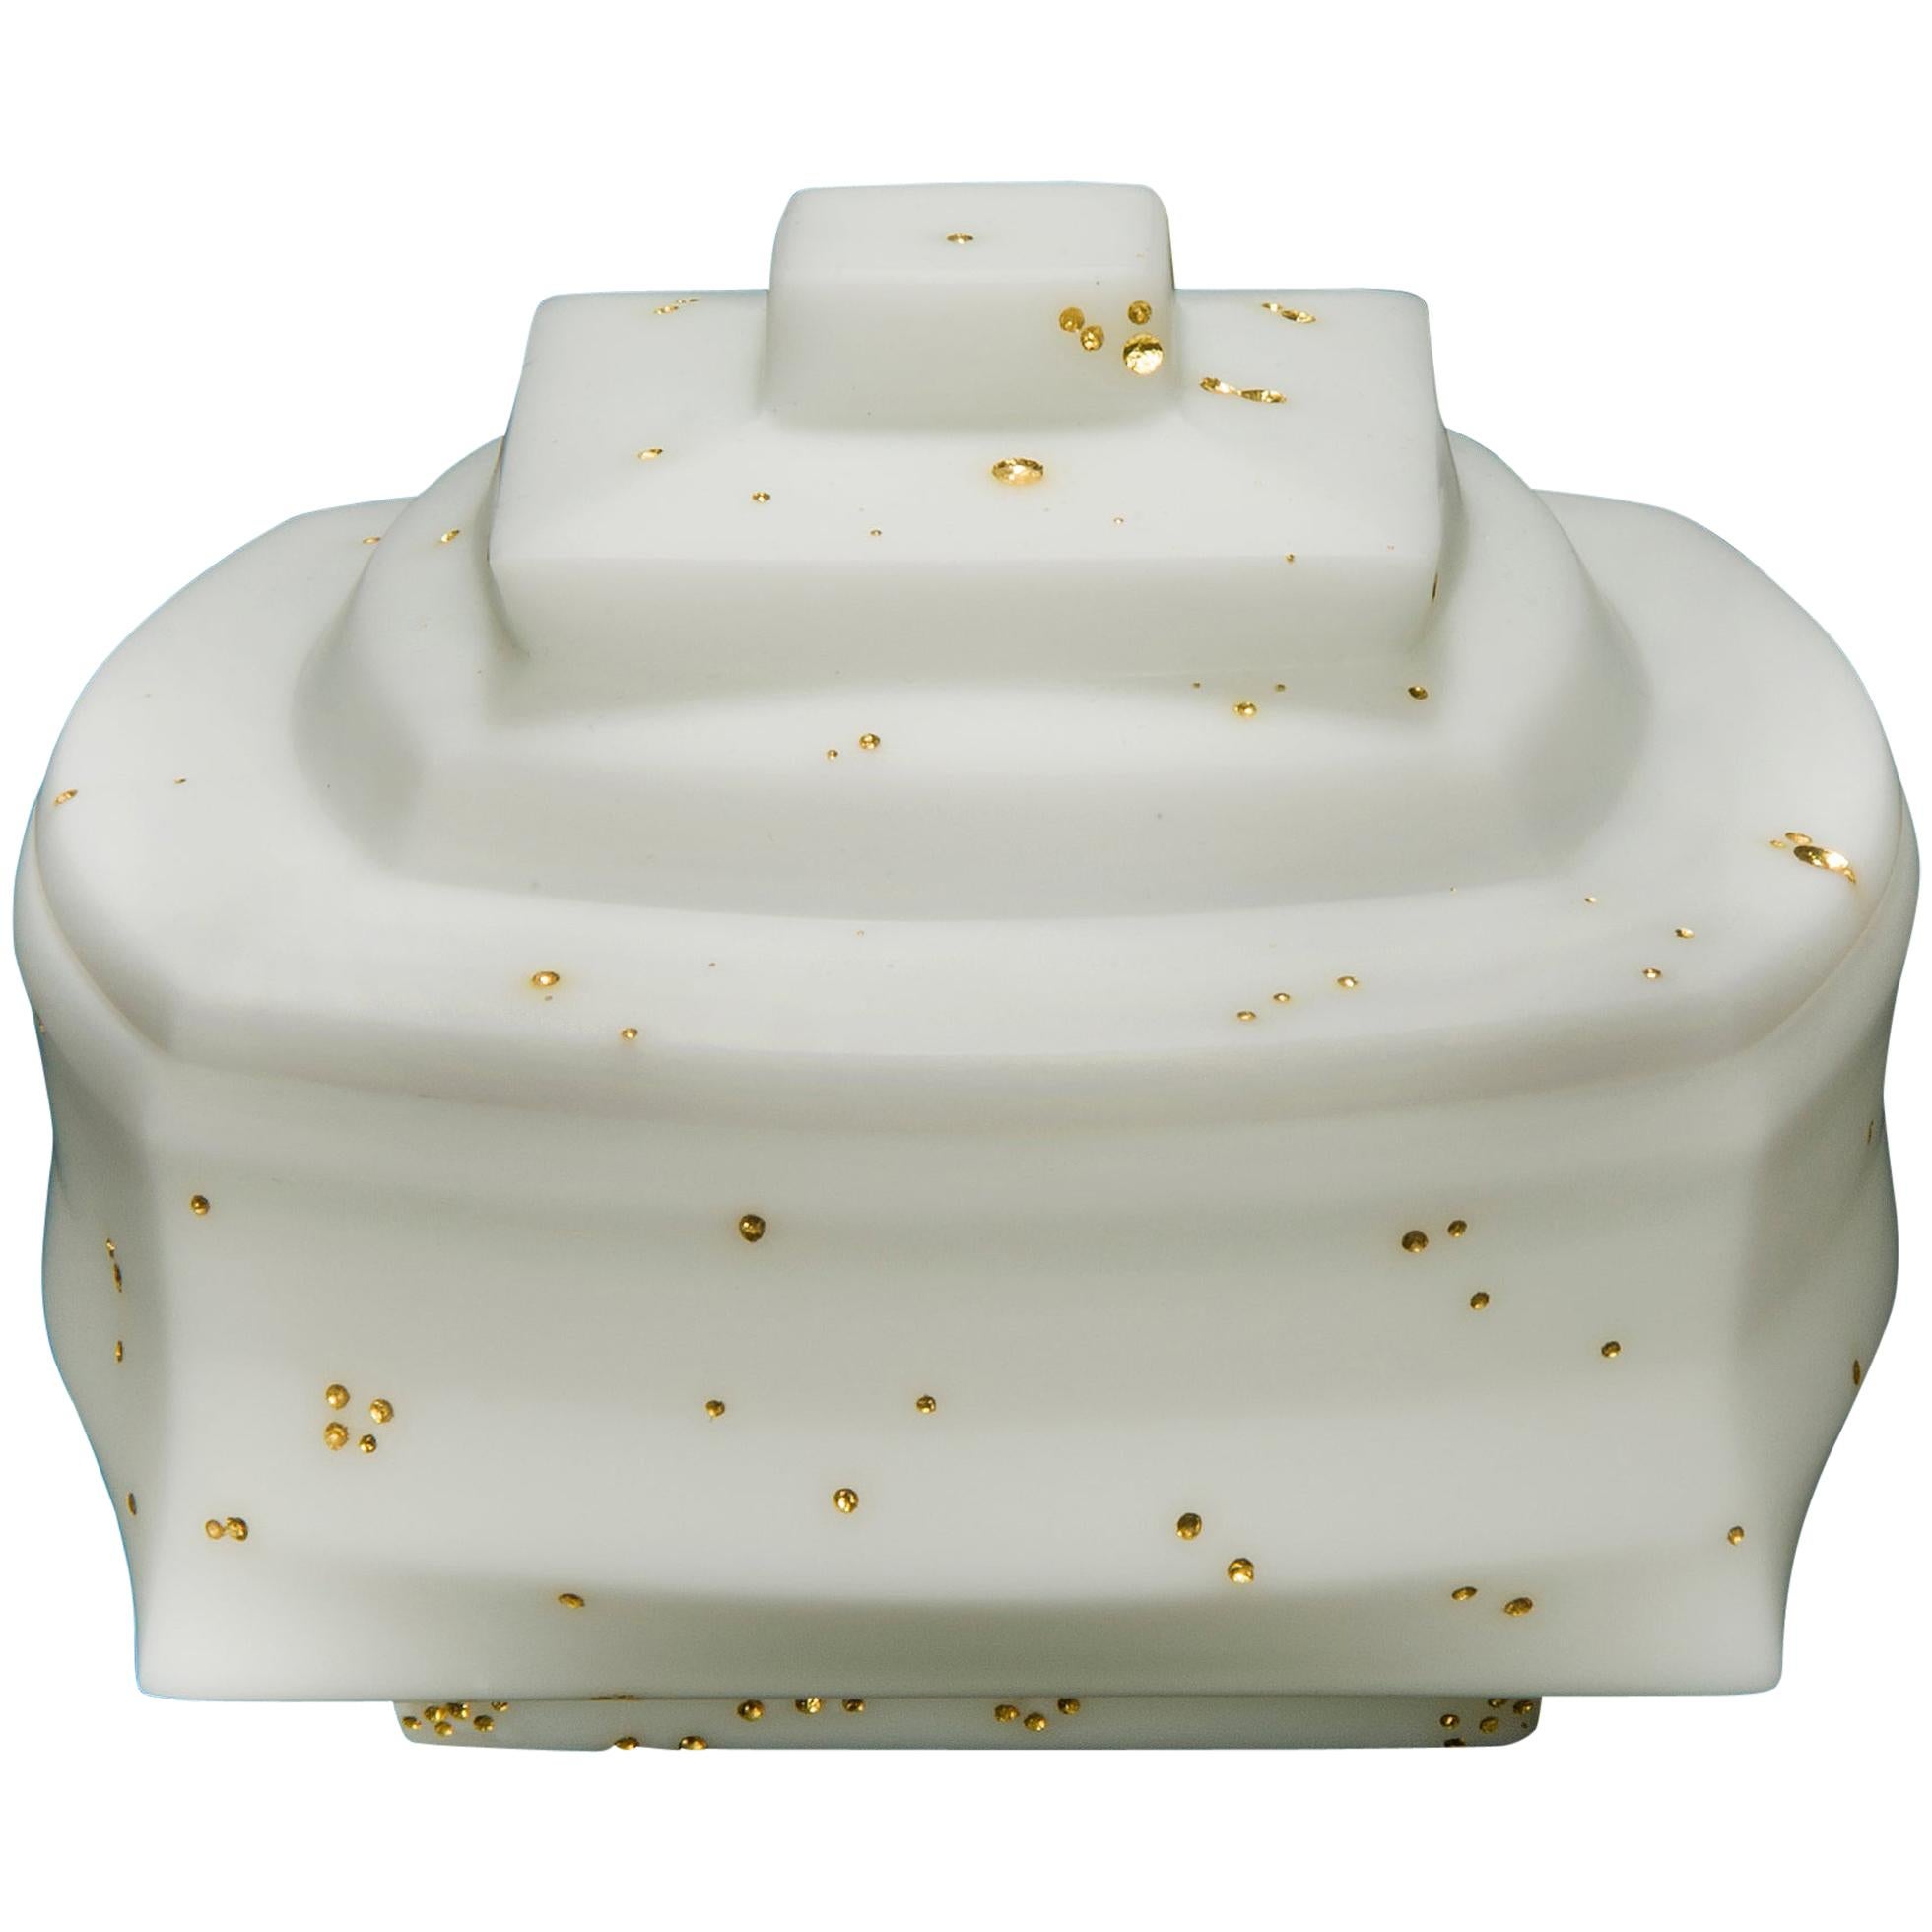 Daam Dah 8-1, a Unique White Glass Lidded Box with Gold Detail by Choi Keeryong